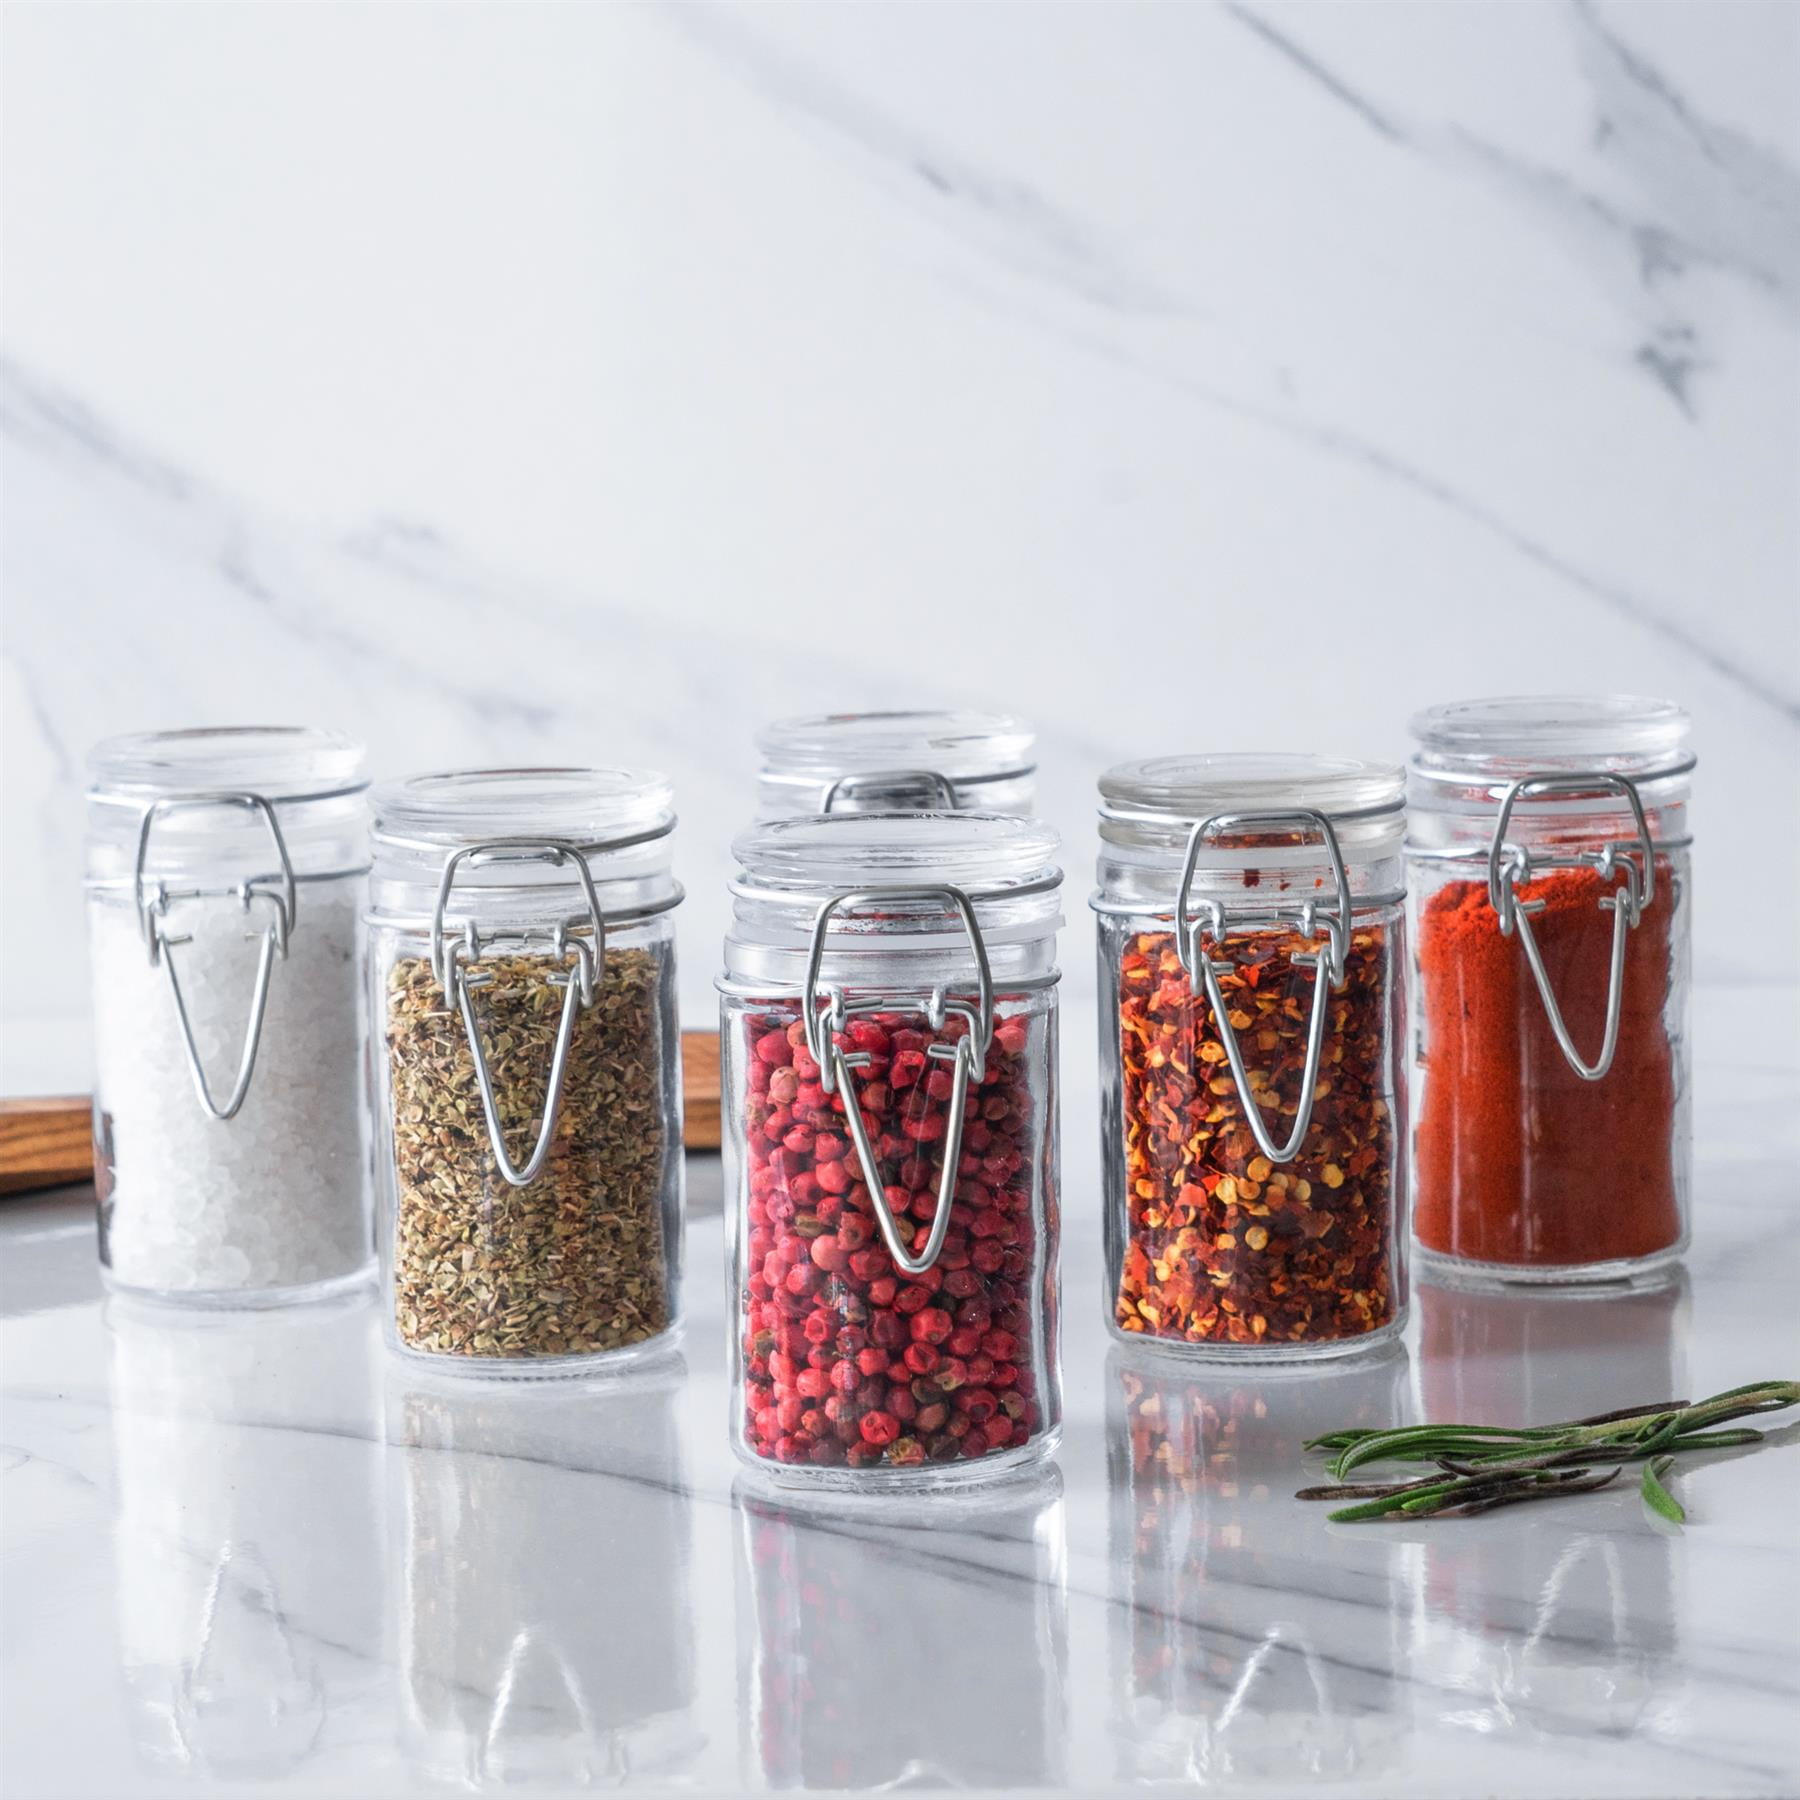 KIVY Glass spice jars transparent Glass Lid [6x 12oz] Stackable & Airtight  small glass jars - Spice containers - Seasoning jars tea - Spice storage